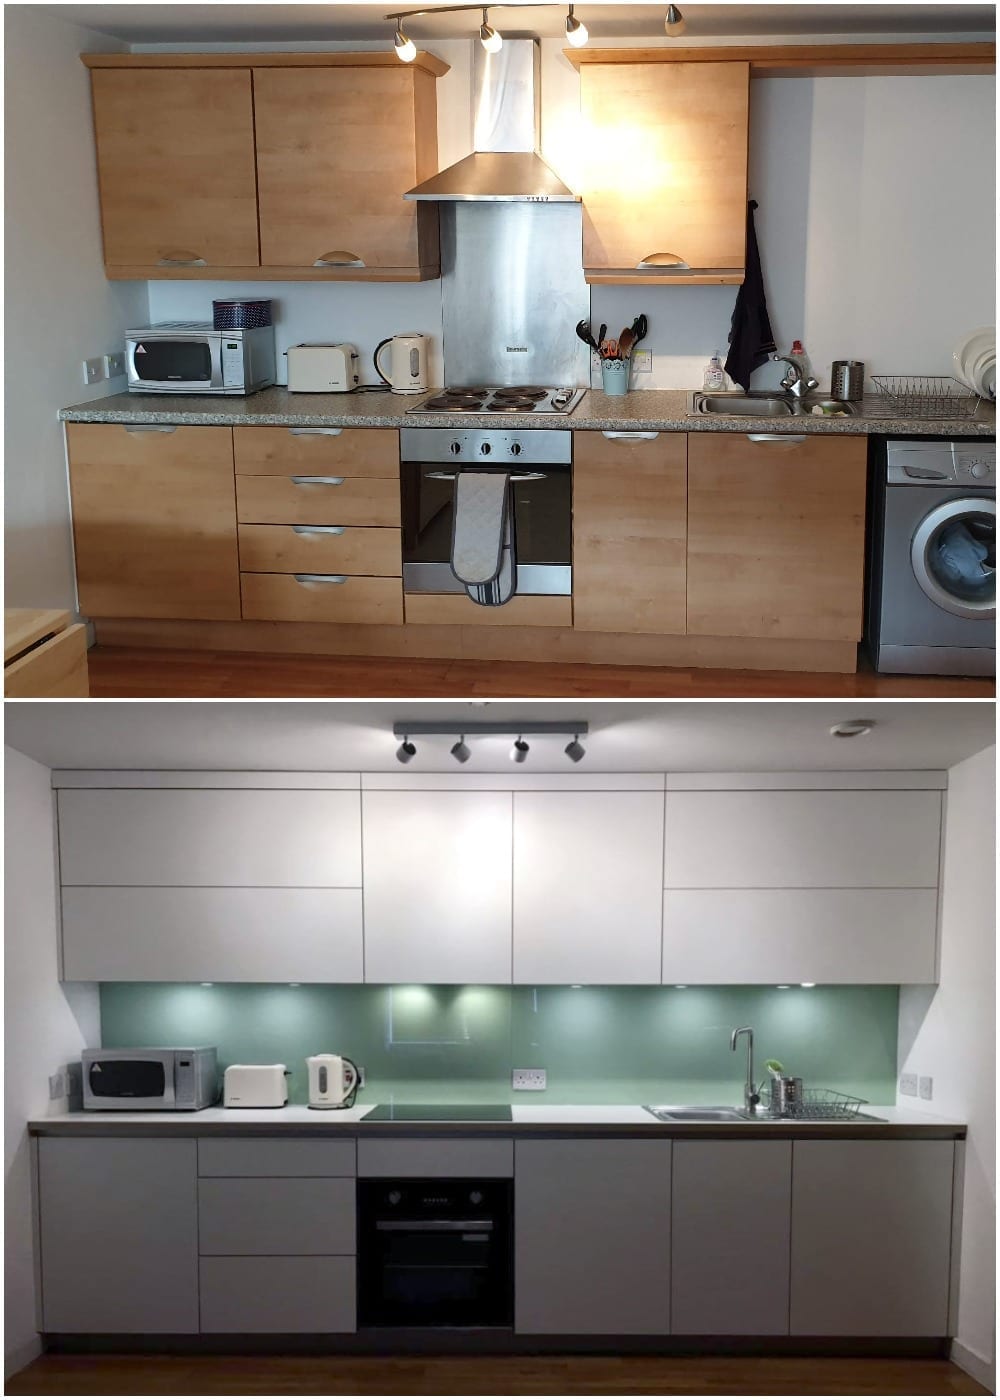 Before and after kitchen furniture